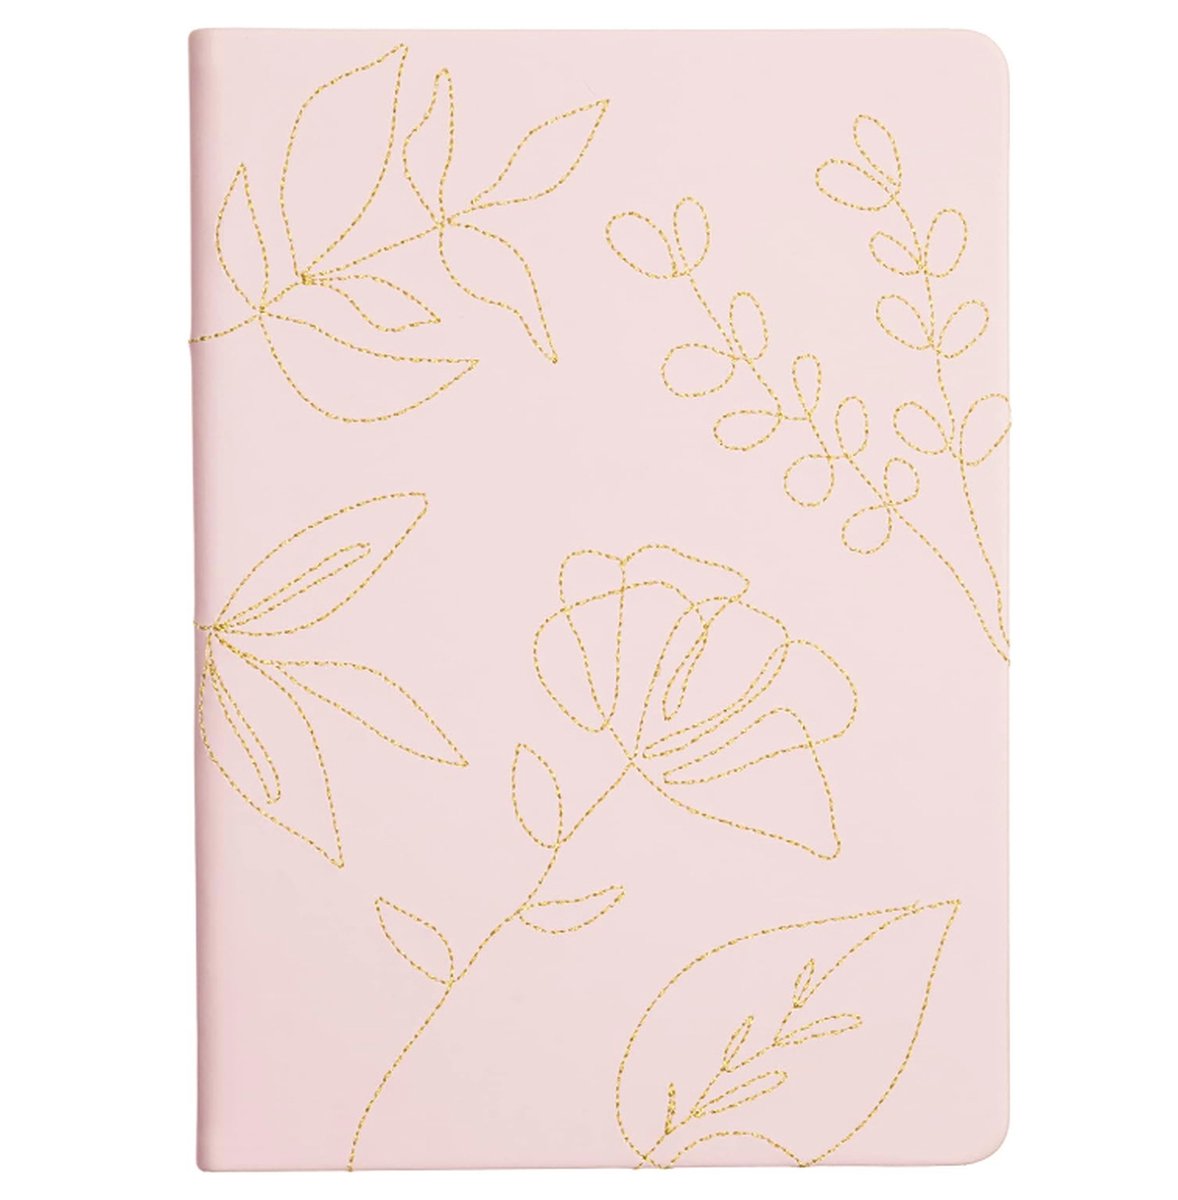 Eccolo Medium Lined Journal, Stitched Flexicover, A5 Writing Journal, 256 Ruled Ivory Pages, Ribbon Bookmark, Lay Flat, Notebook for Work or School, Gold Stitched Botanicals (20.96 x 14.61 x 1.02 cm)